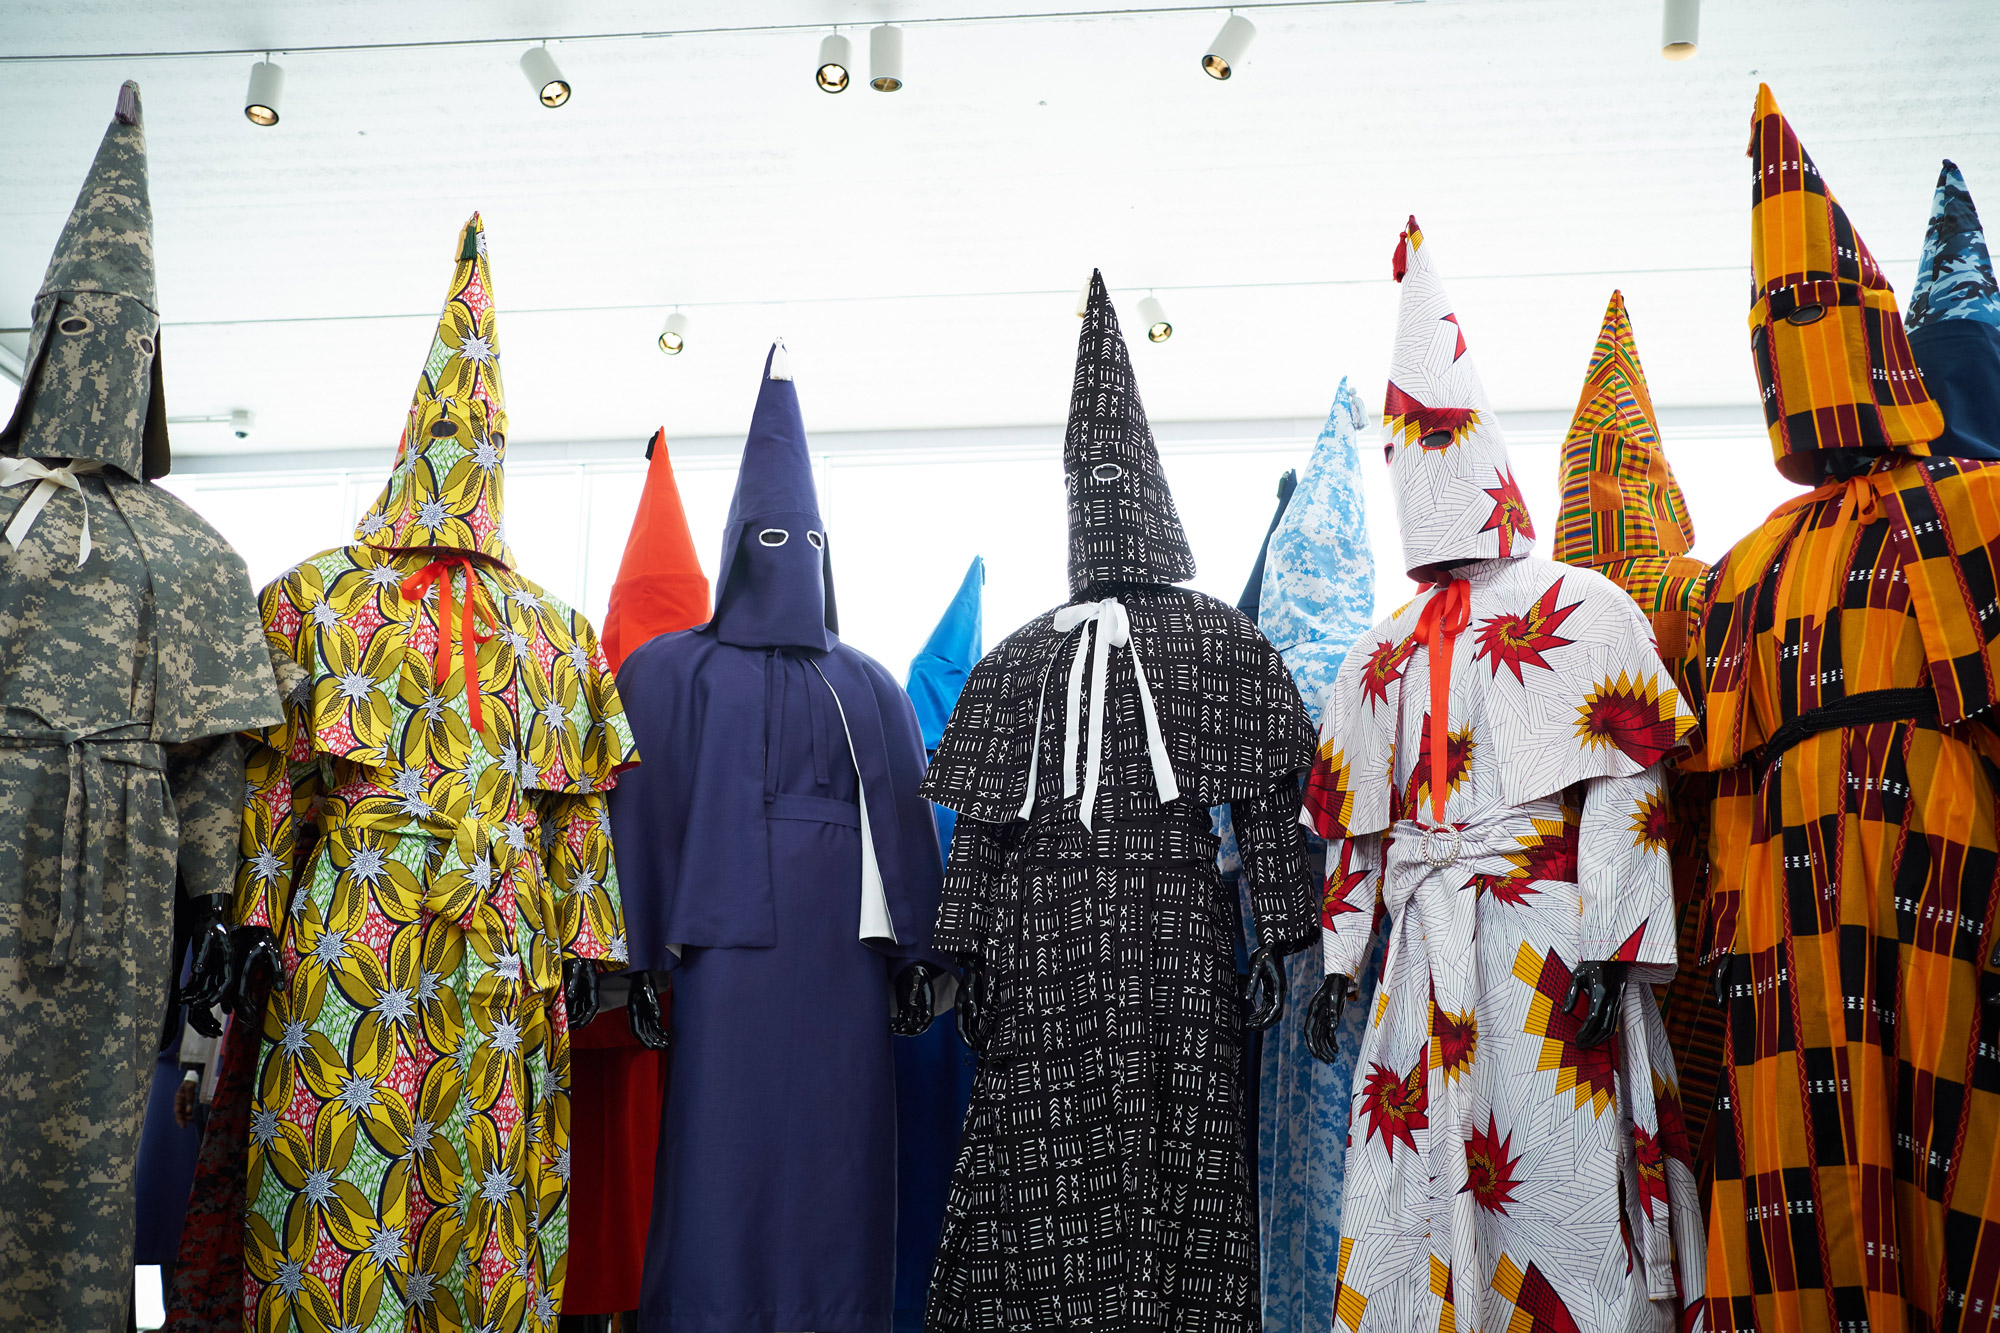 An artist's slavery relics and reimagined KKK robes show us the reality of  systemic racism